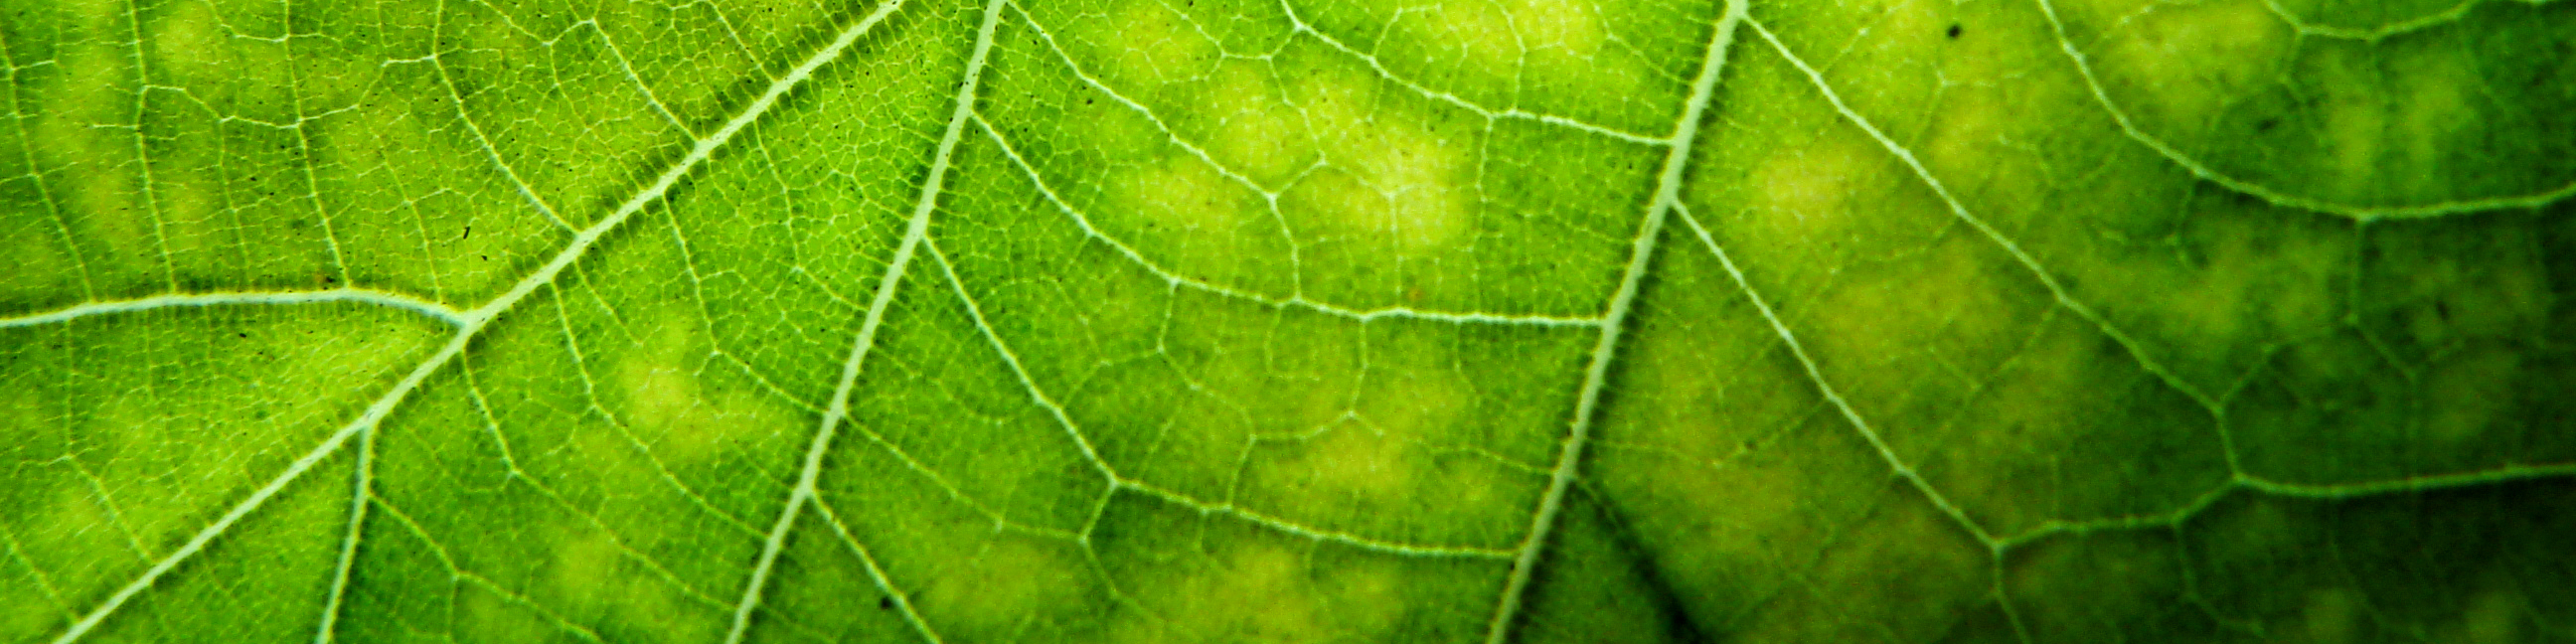 Closeup view of leaf surface with high resolution details